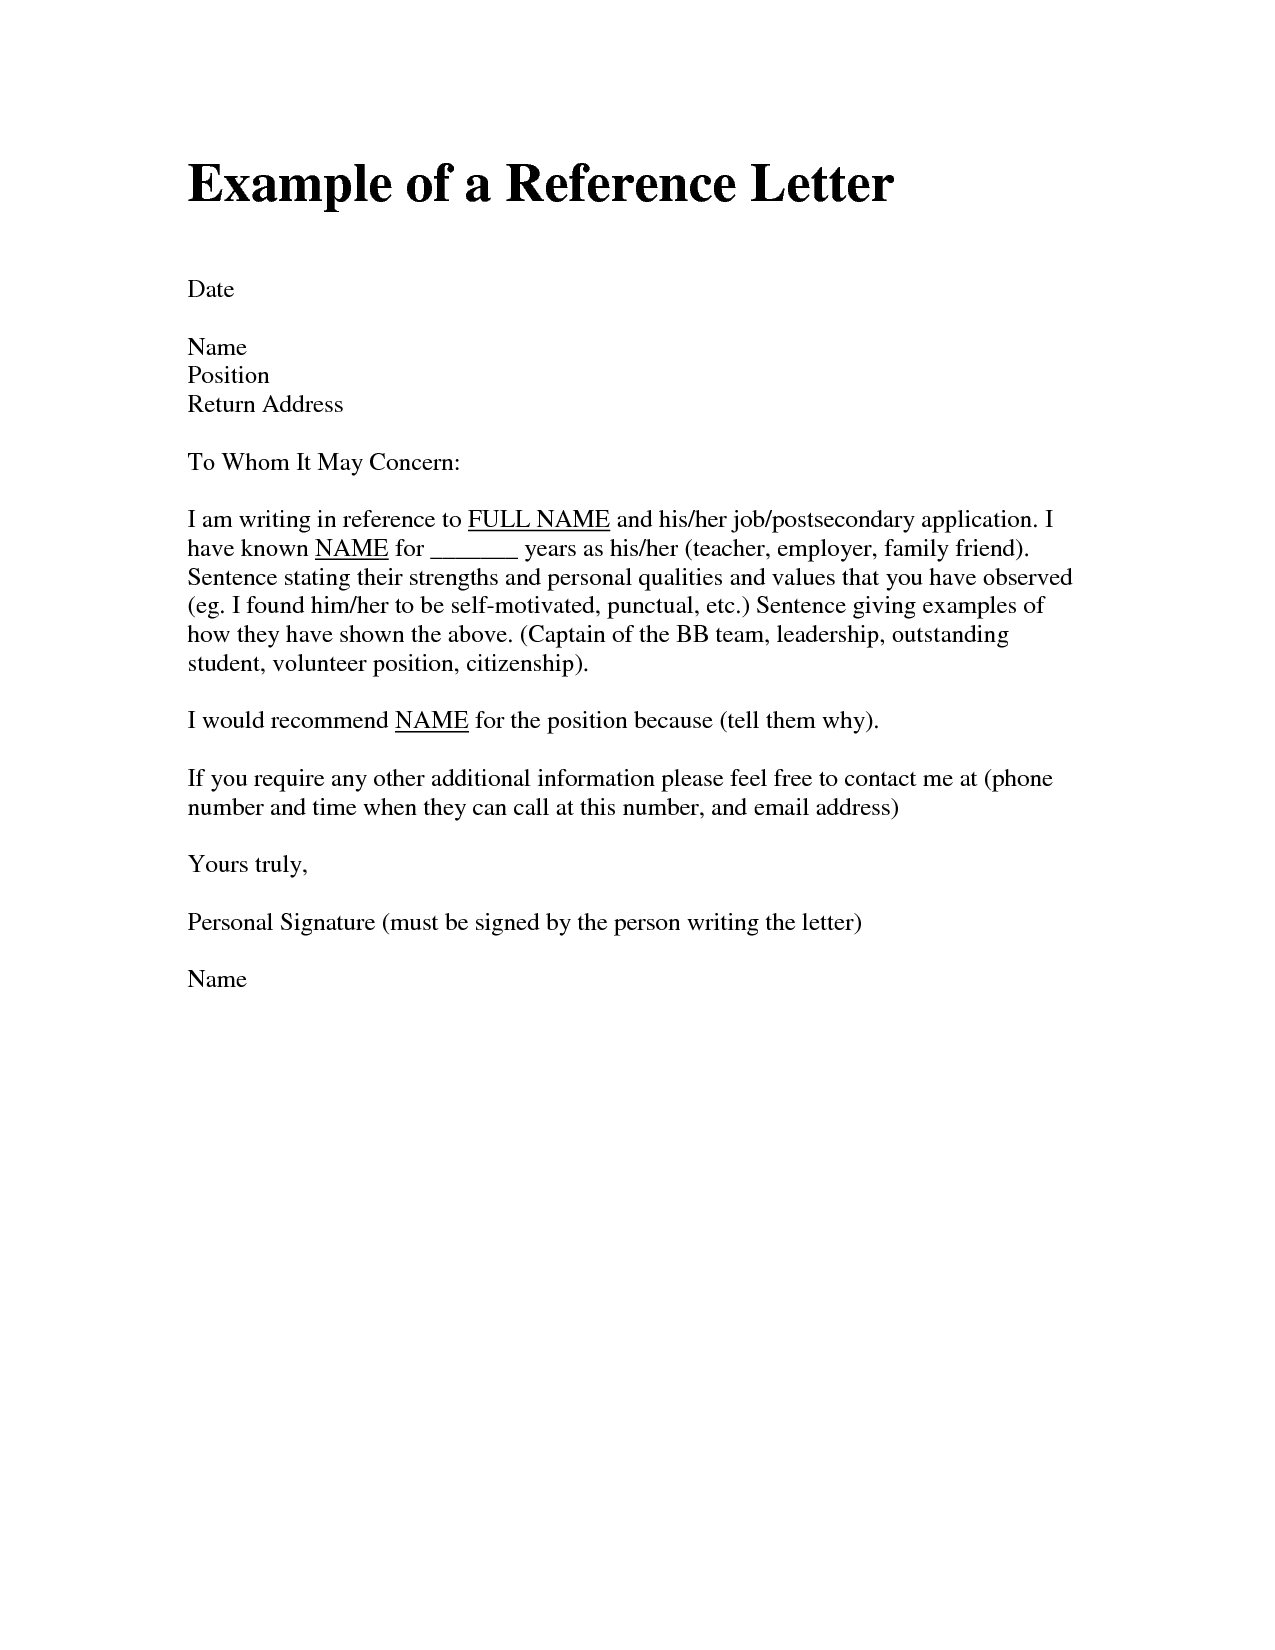 Example Personal Reference Letter Friend Debandje intended for size 1275 X 1650